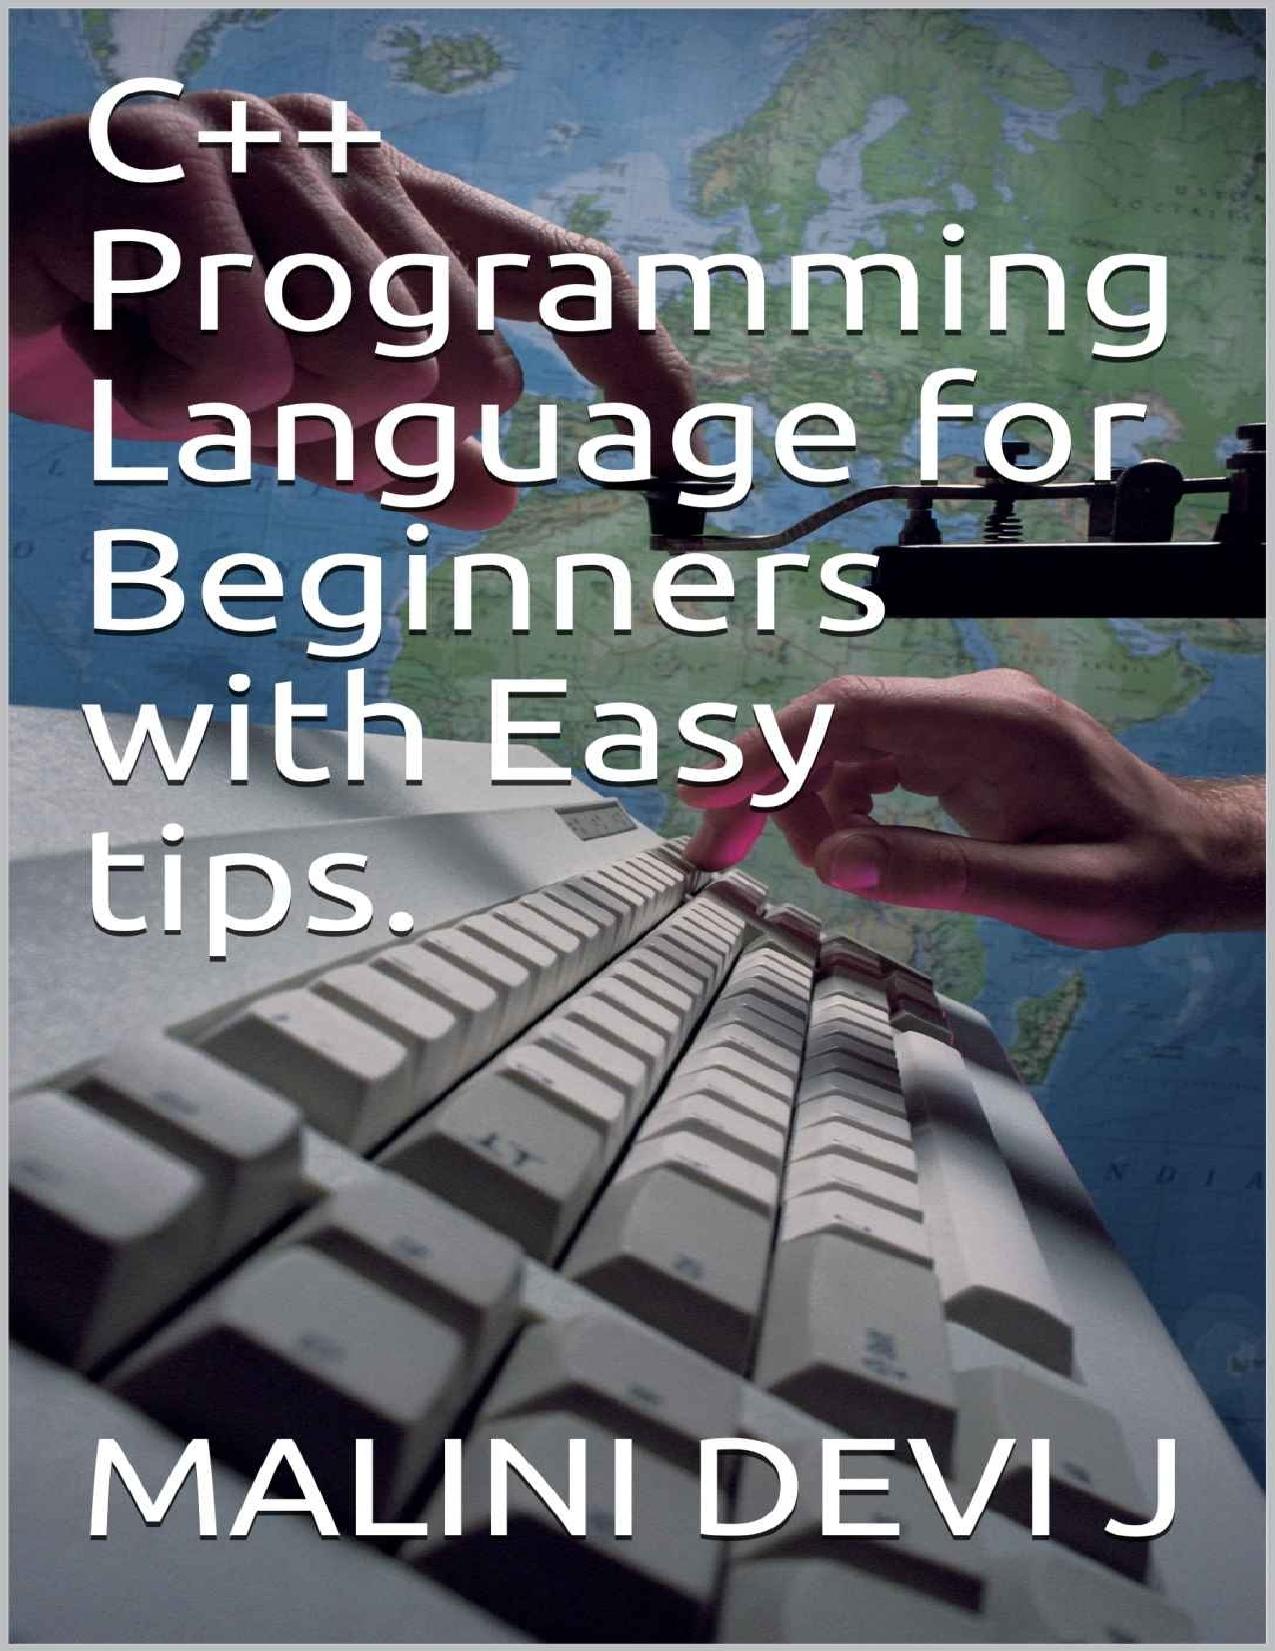 C++ Programming Language for Beginners with Easy Tips